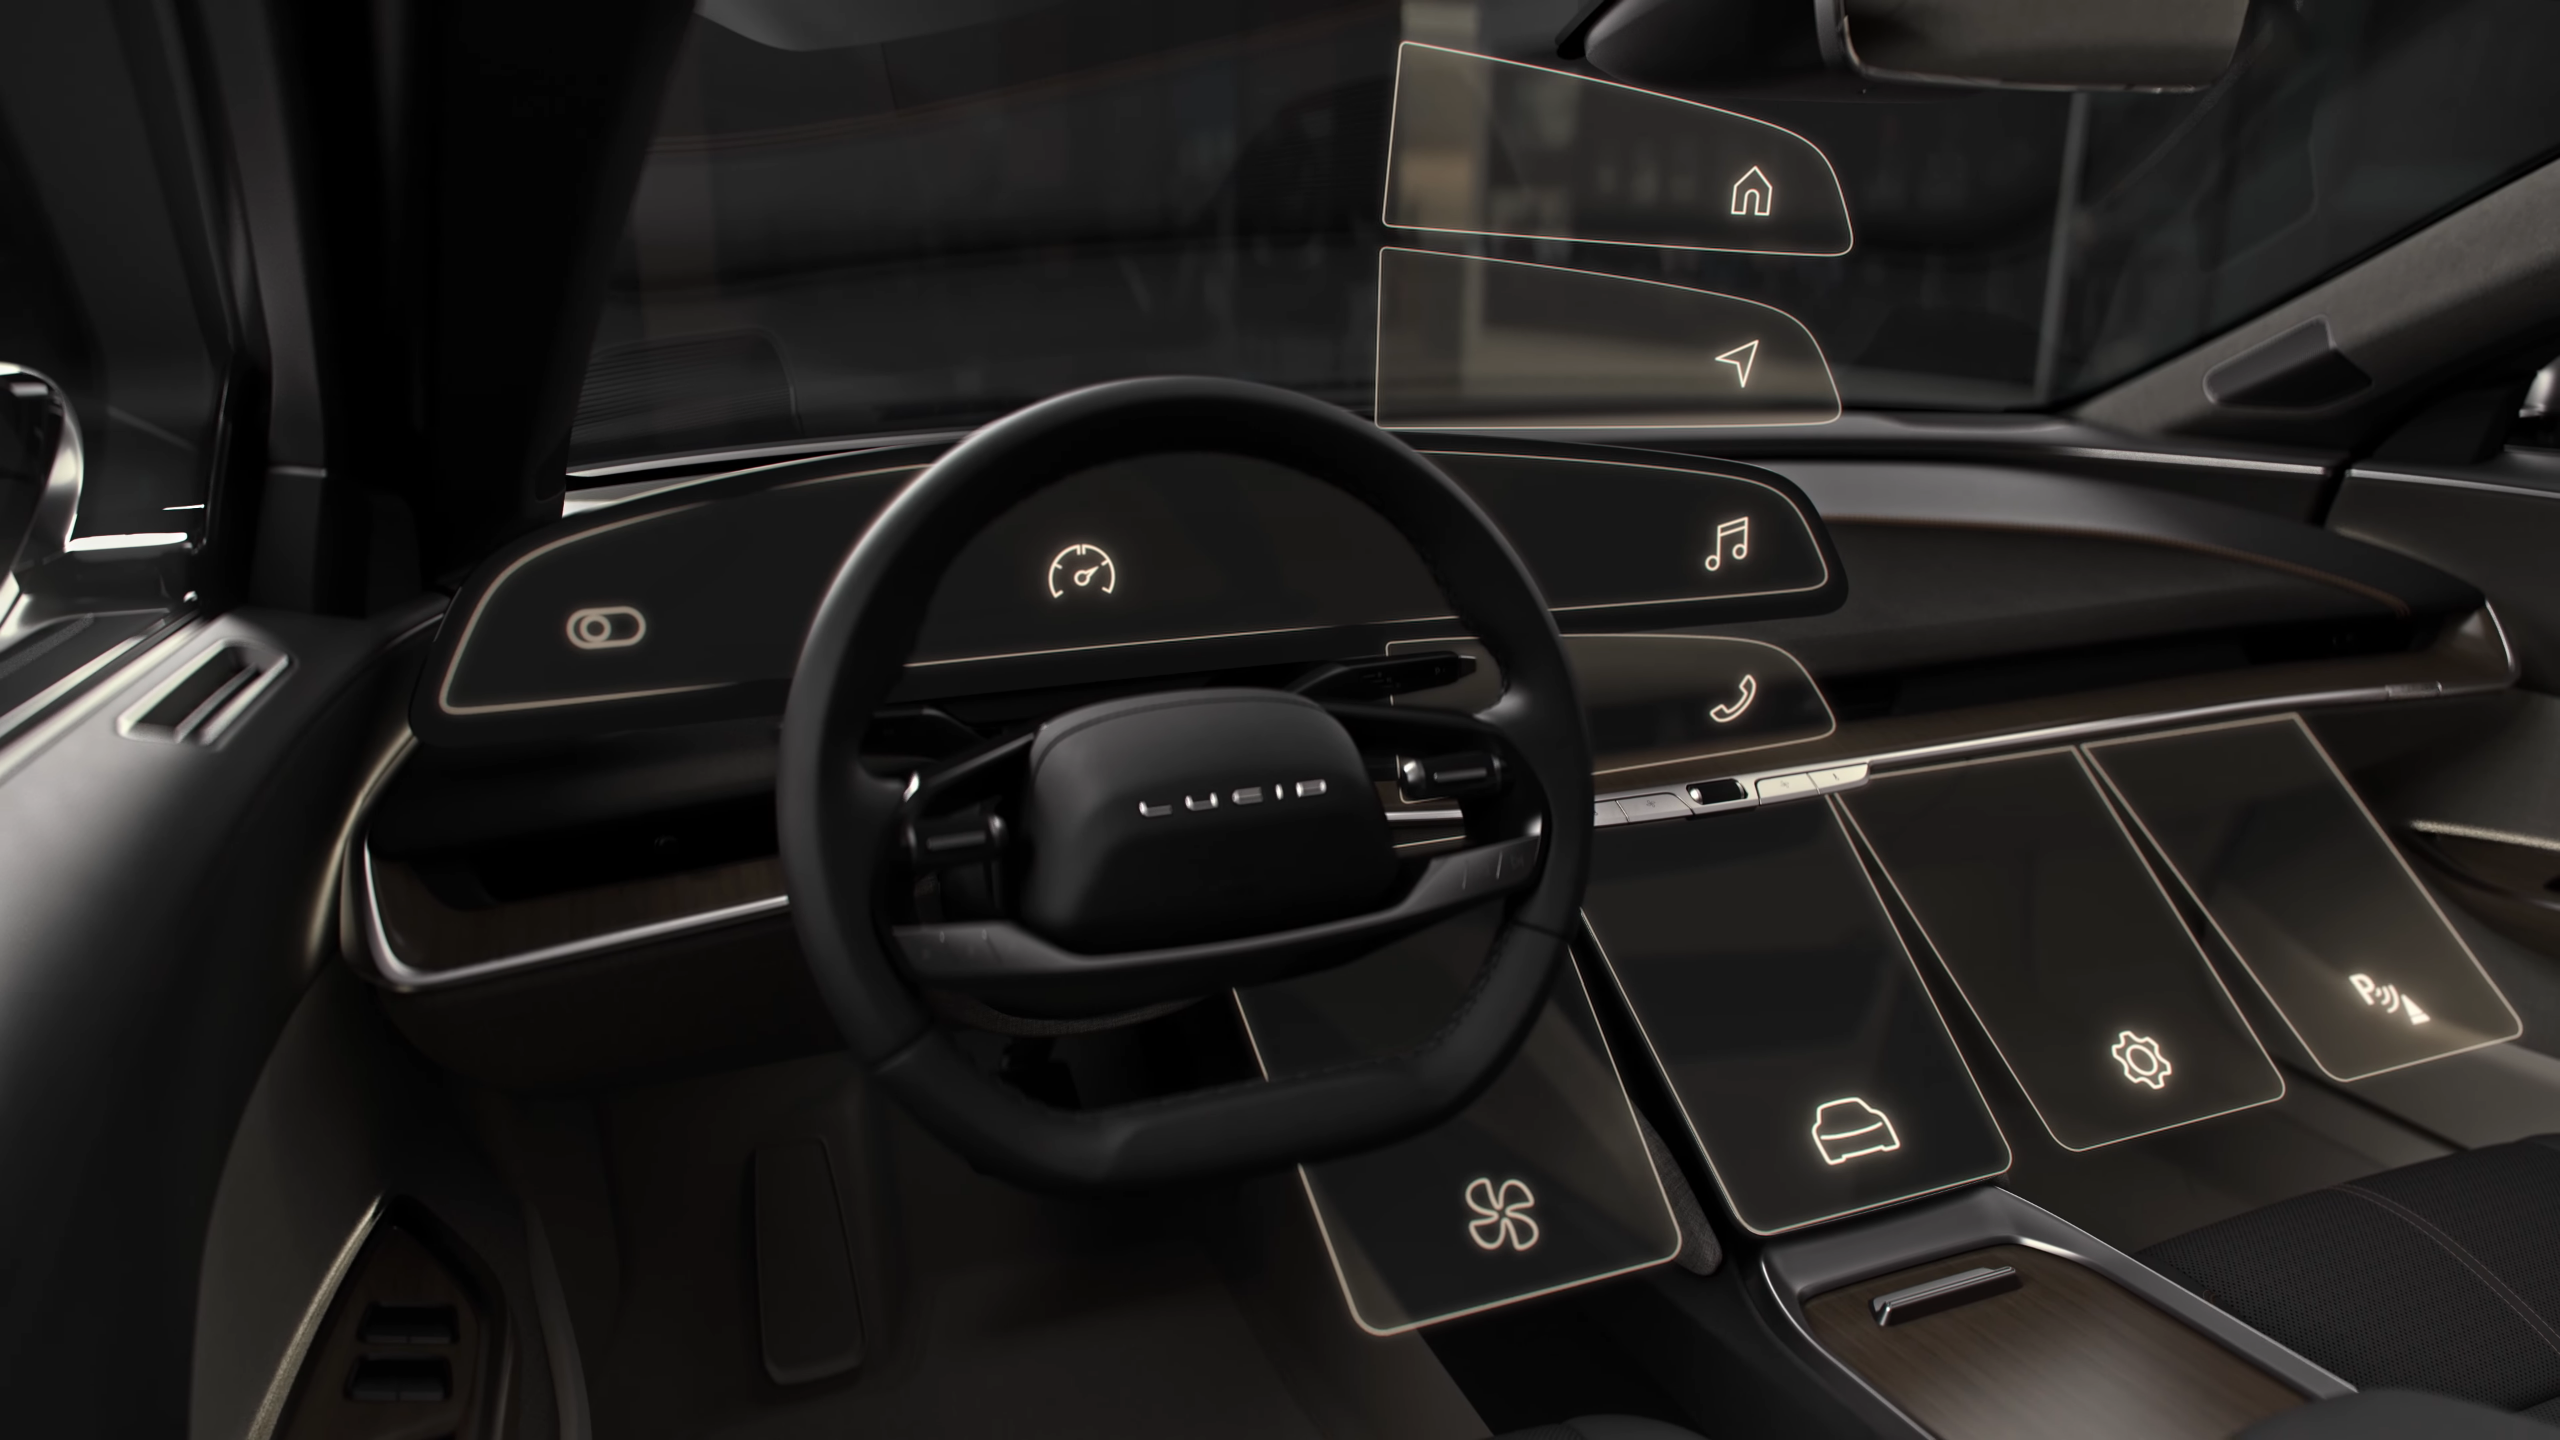 Lucid Air’s User Interface Has Four Screens, Some Buttons And A Bit Of Common Sense